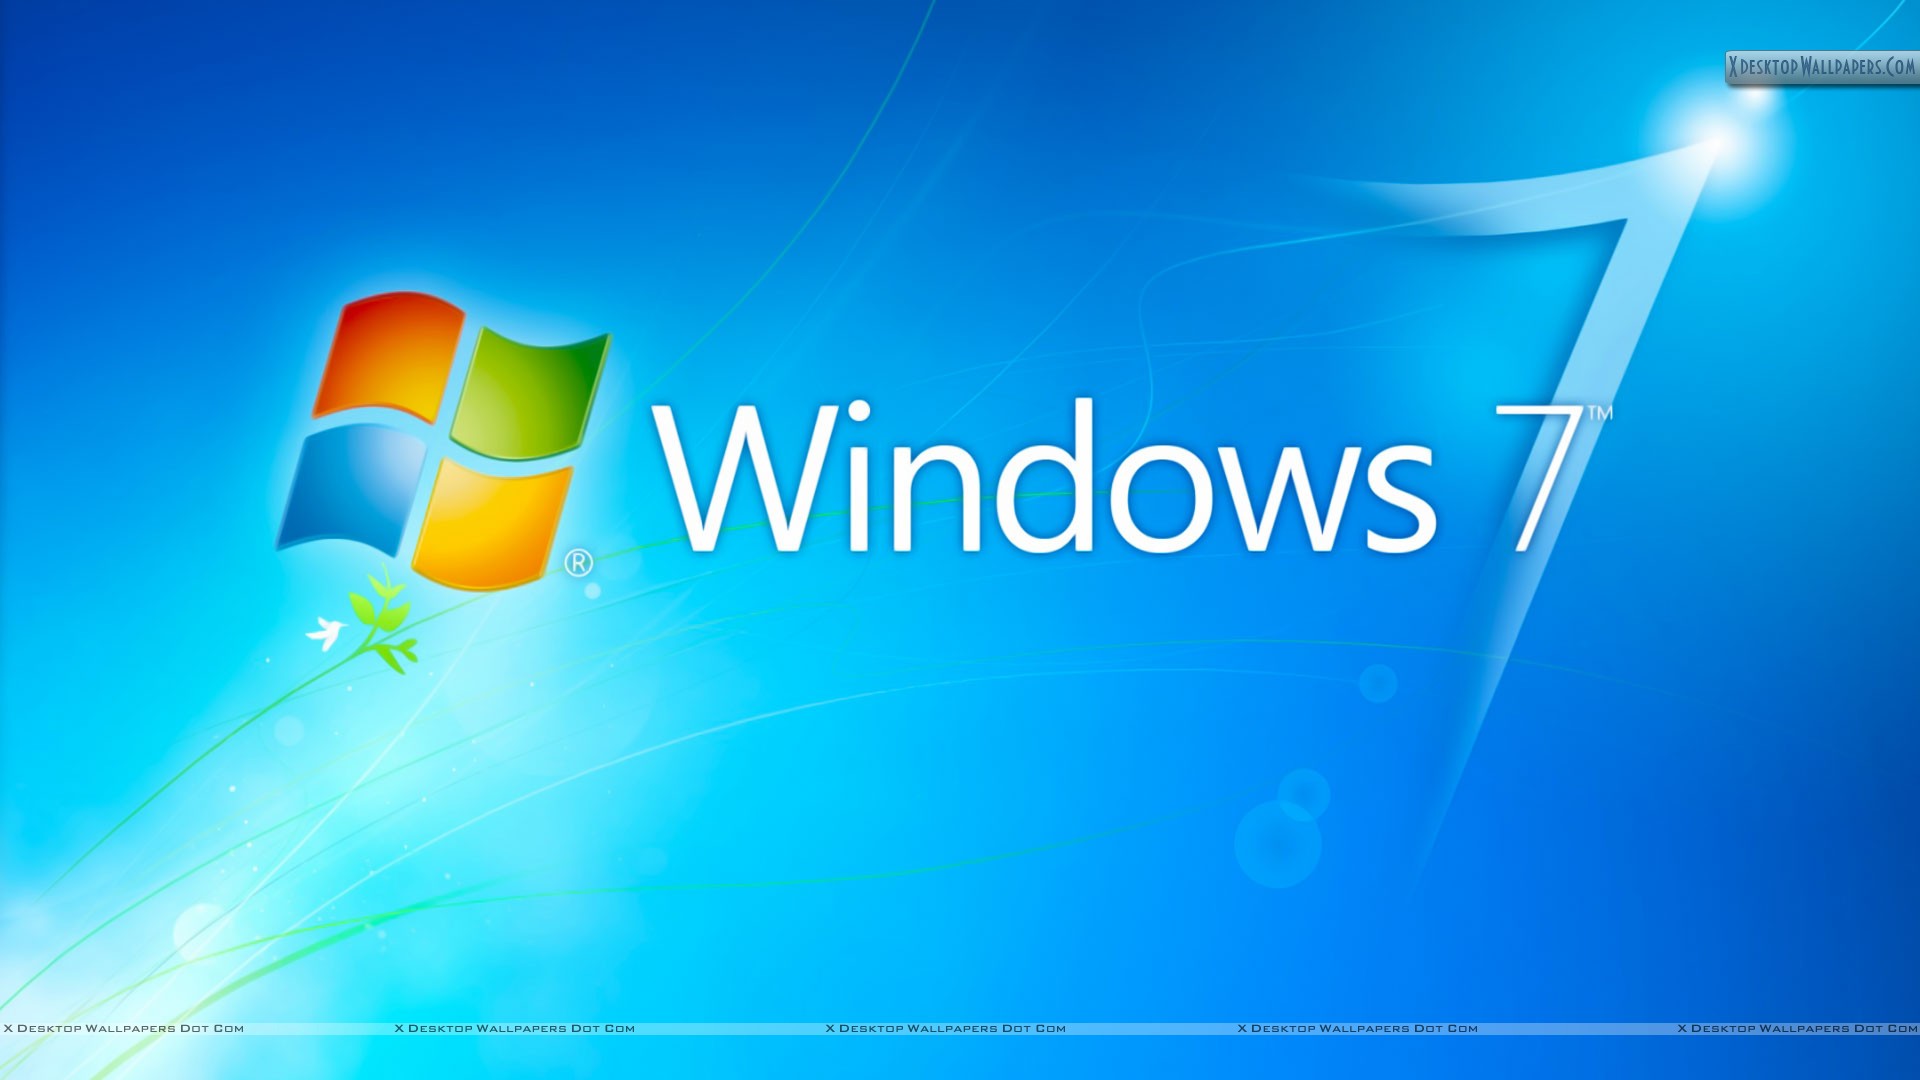 Windows 7 HD Blue Background With Logo Wallpaper 1920x1080